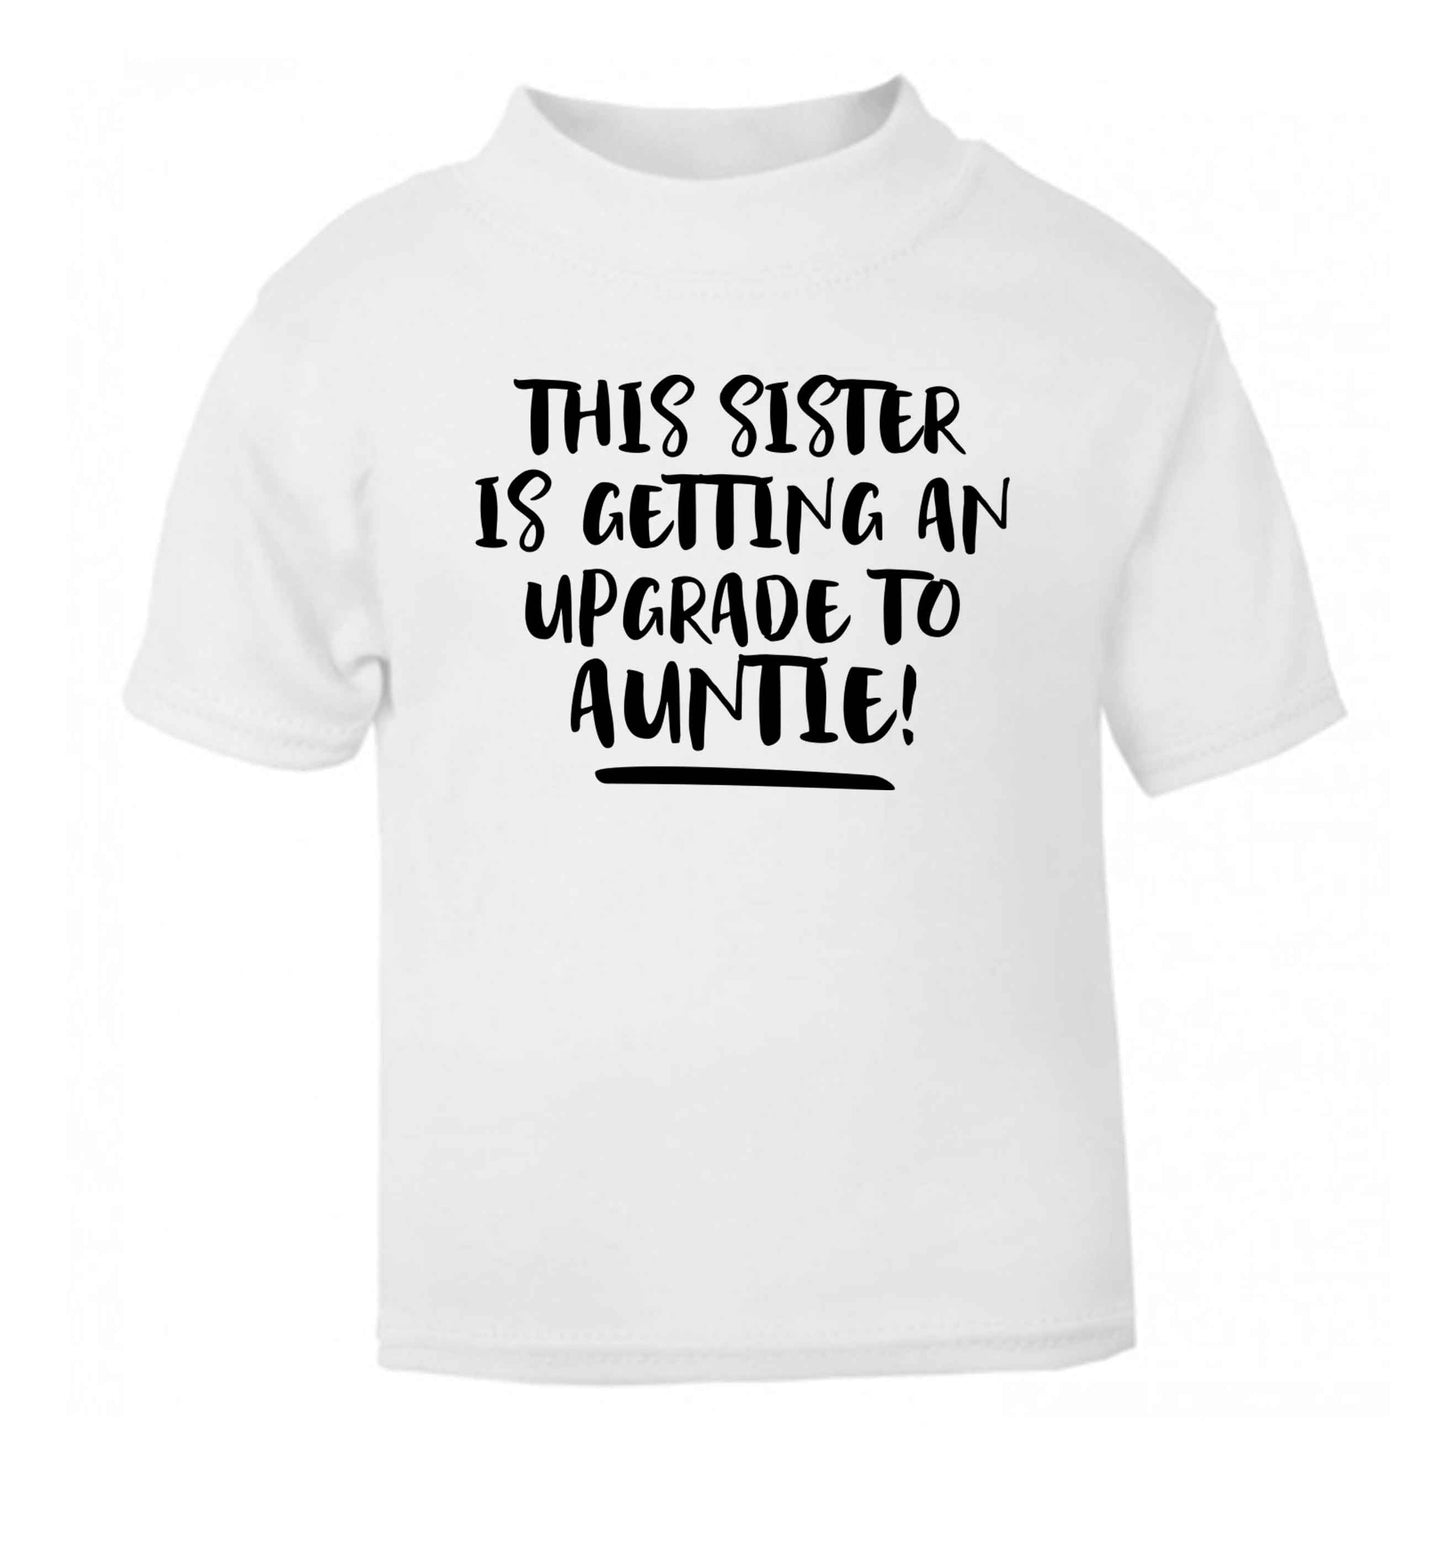 This sister is getting an upgrade to auntie! white Baby Toddler Tshirt 2 Years